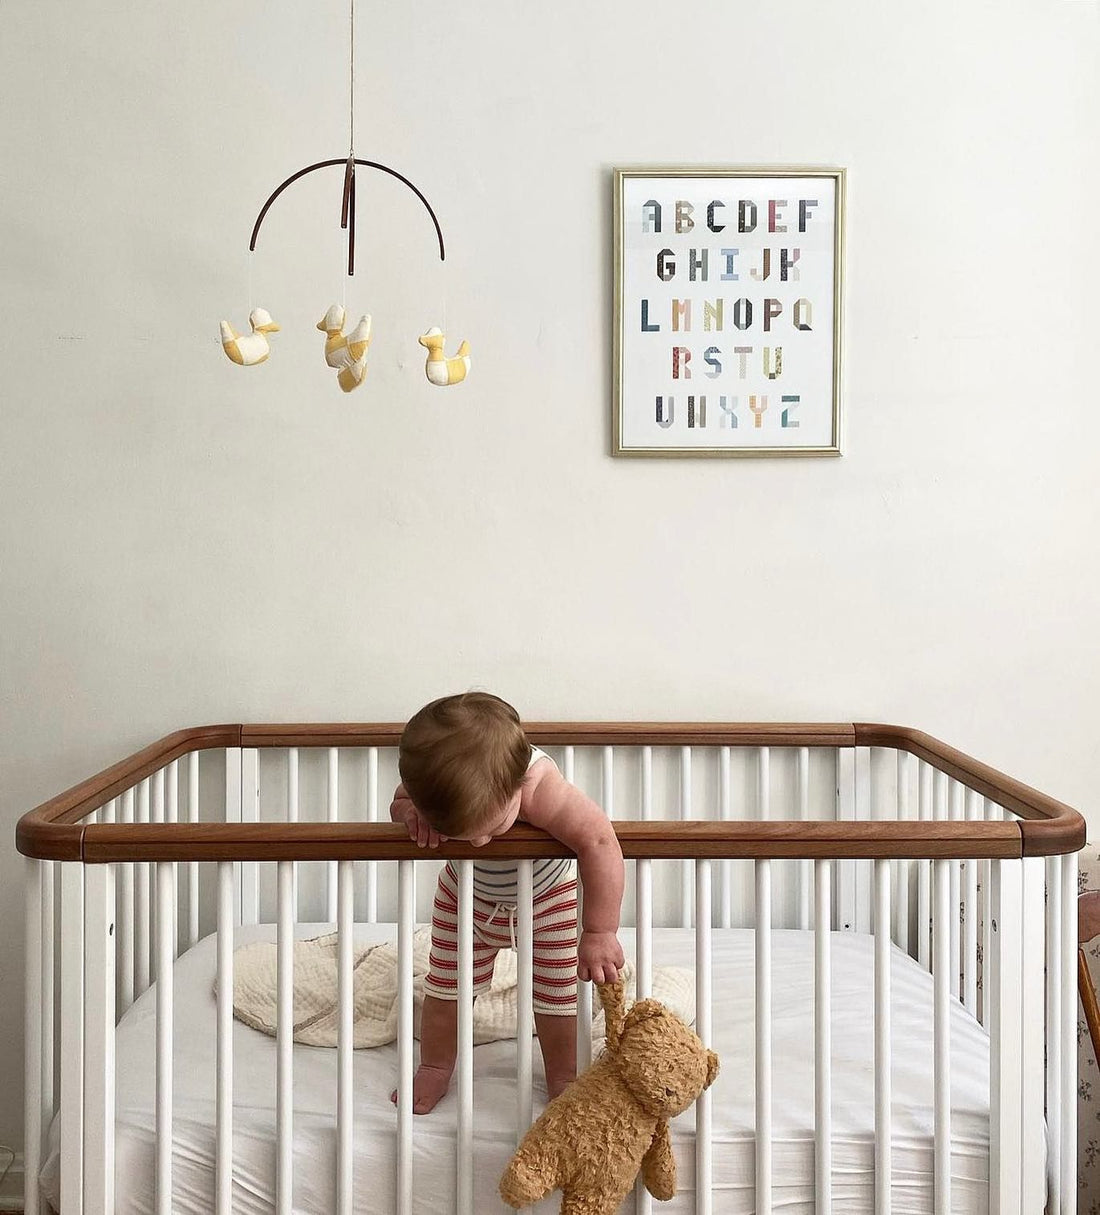 Bassinet Vs. Crib: What’s The Difference And Which One Is Best For Your Baby?